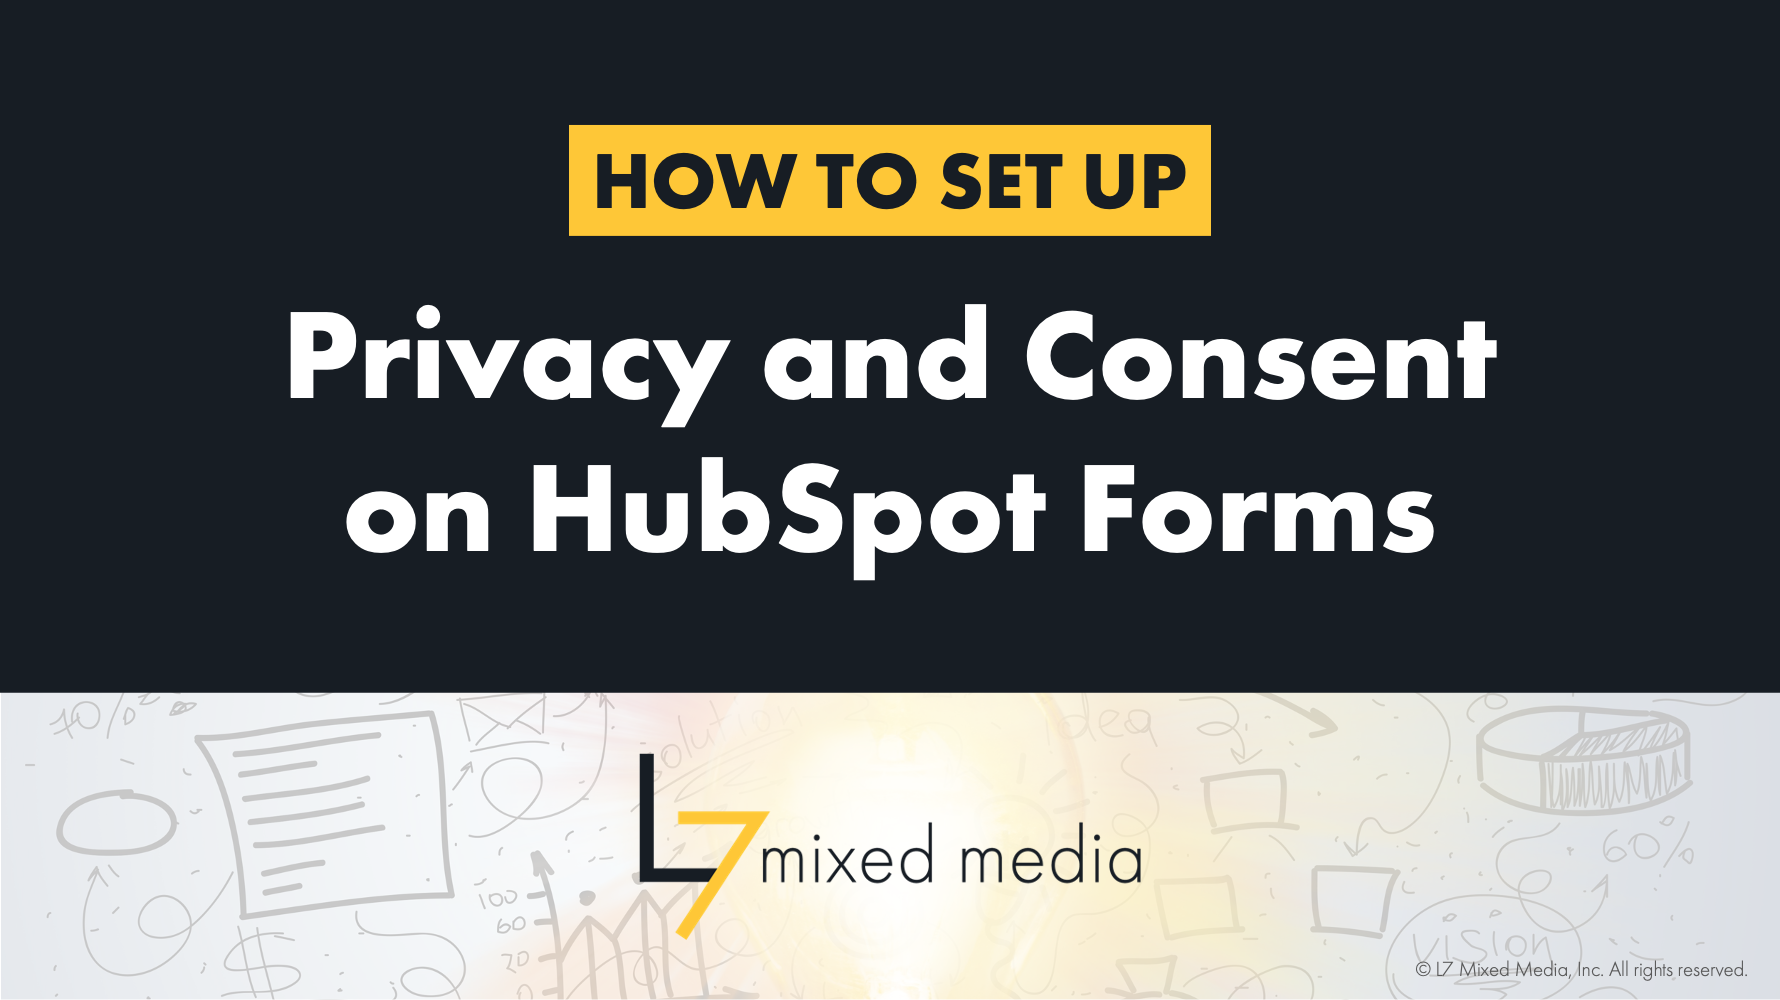 How to Set Up Privacy and Consent on HubSpot Forms